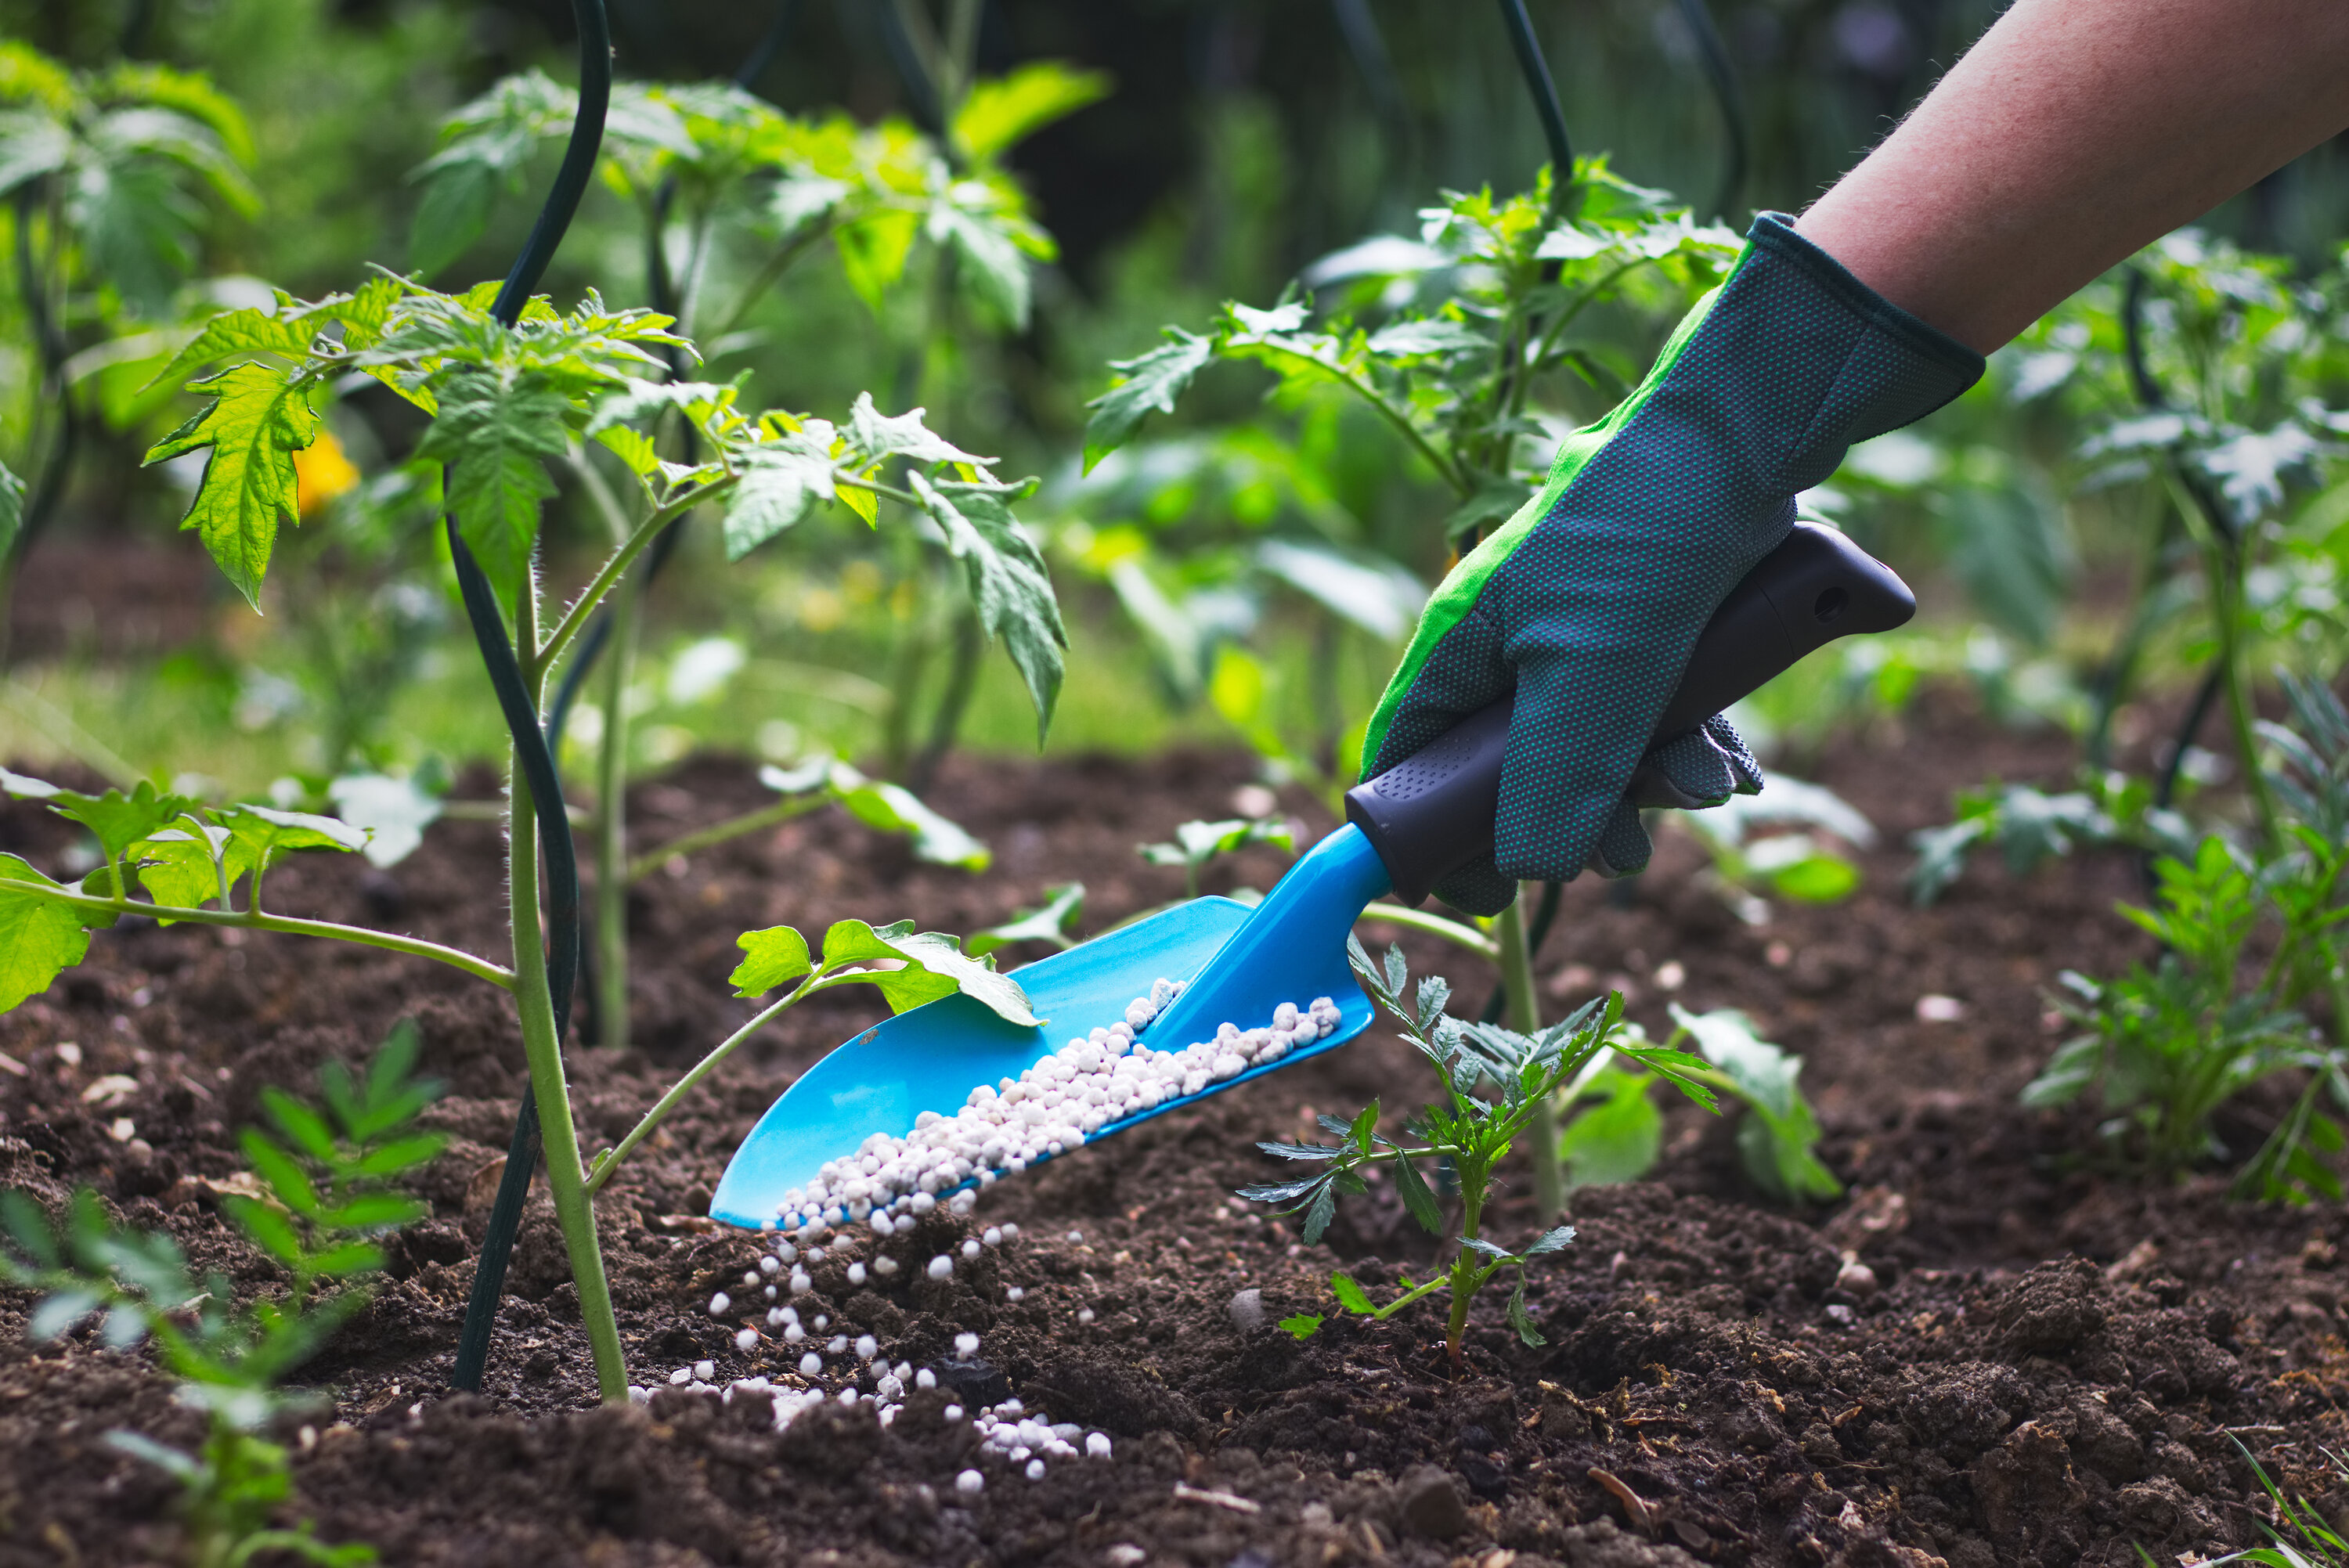 A gloved person pouring fertilizer from a shovel into the soil with plants growing around